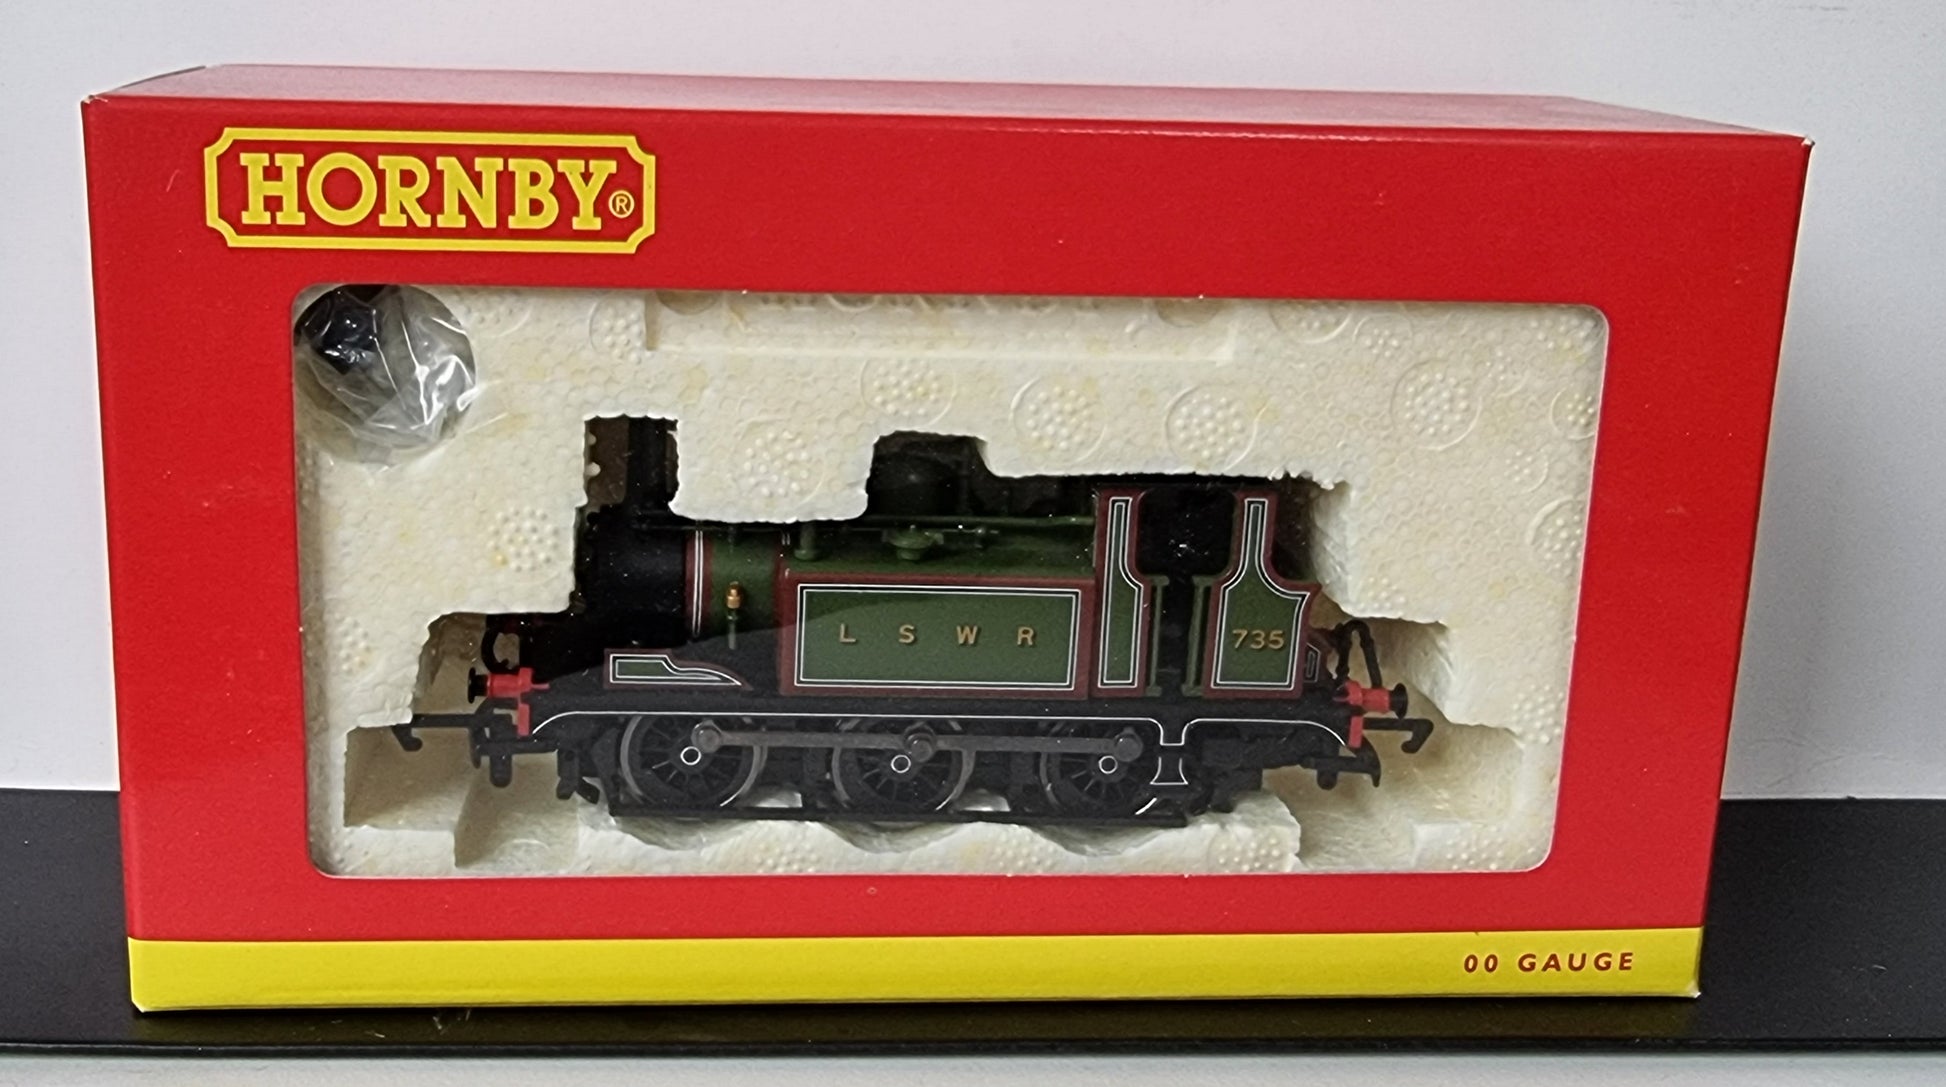 Hornby R3046 LSWR Terrier AIX 735 Limited Edition 258/1000 - Chester Model Centre